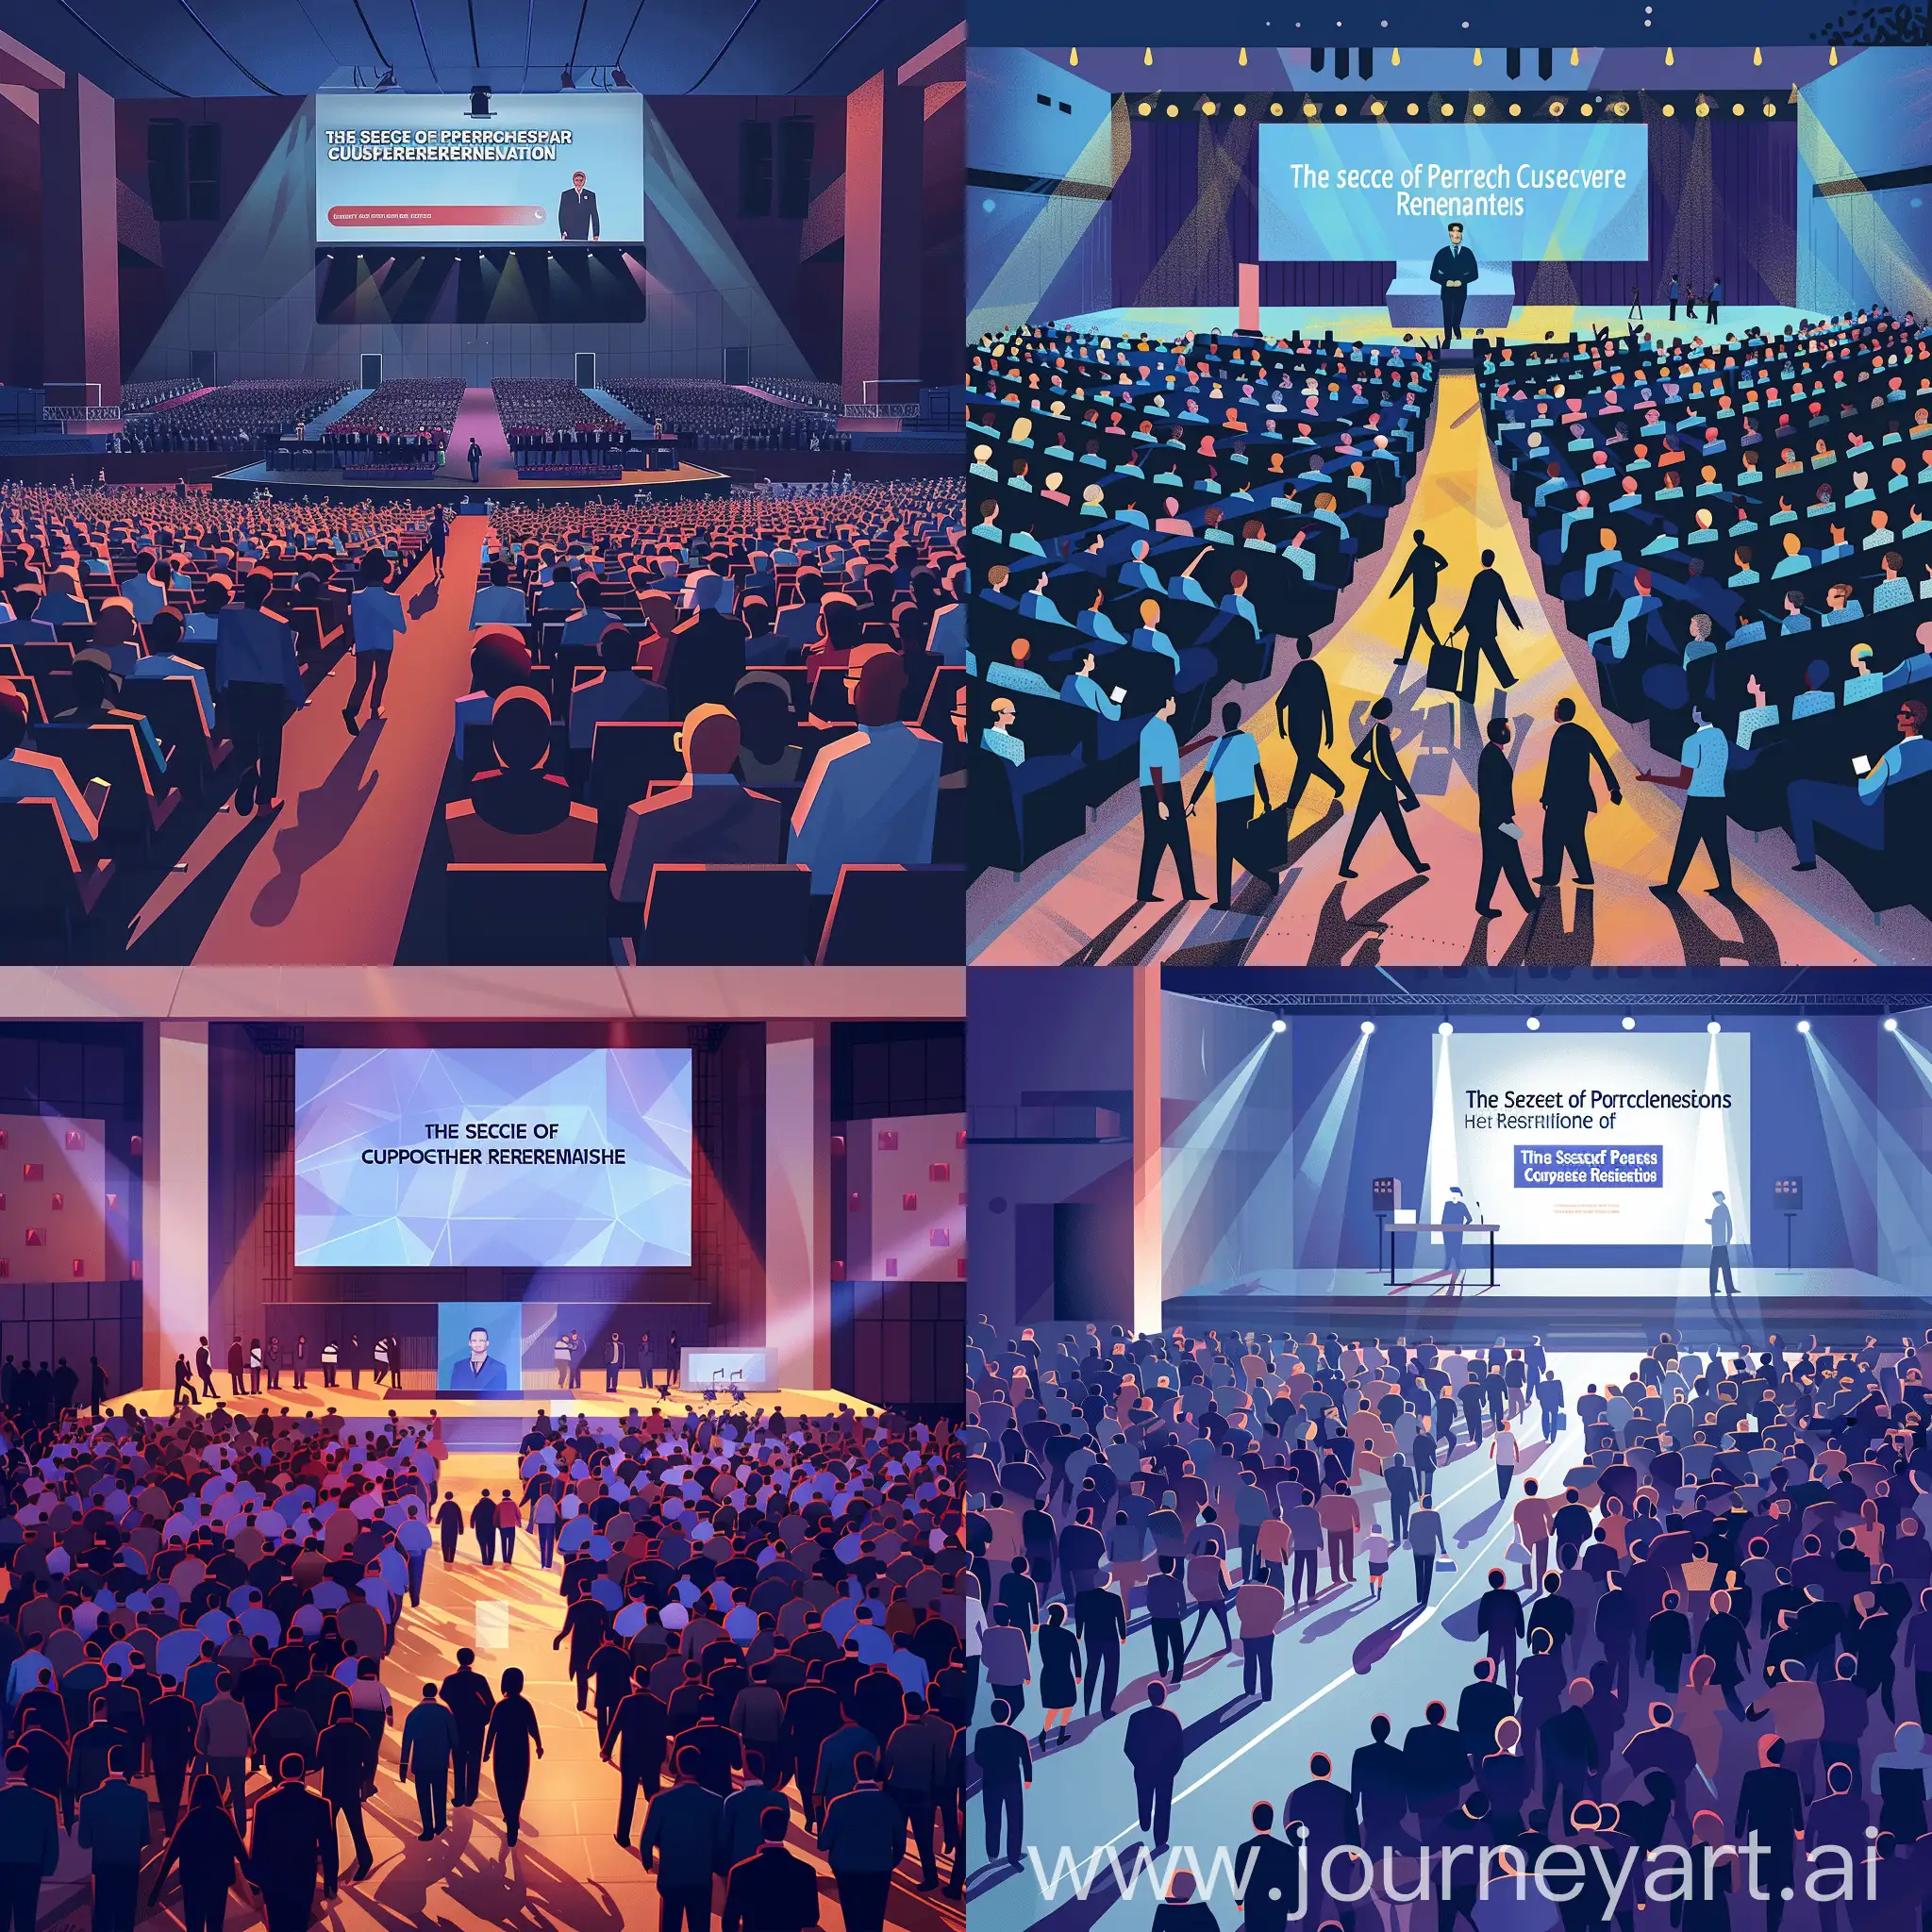 Please create a picture with a big conference hall, where 600 People are heading to the exit, in the background is a stage with one male person and a big screen where poeple can read "Das Geheimnis einer perfekten Kundenbeziehung"